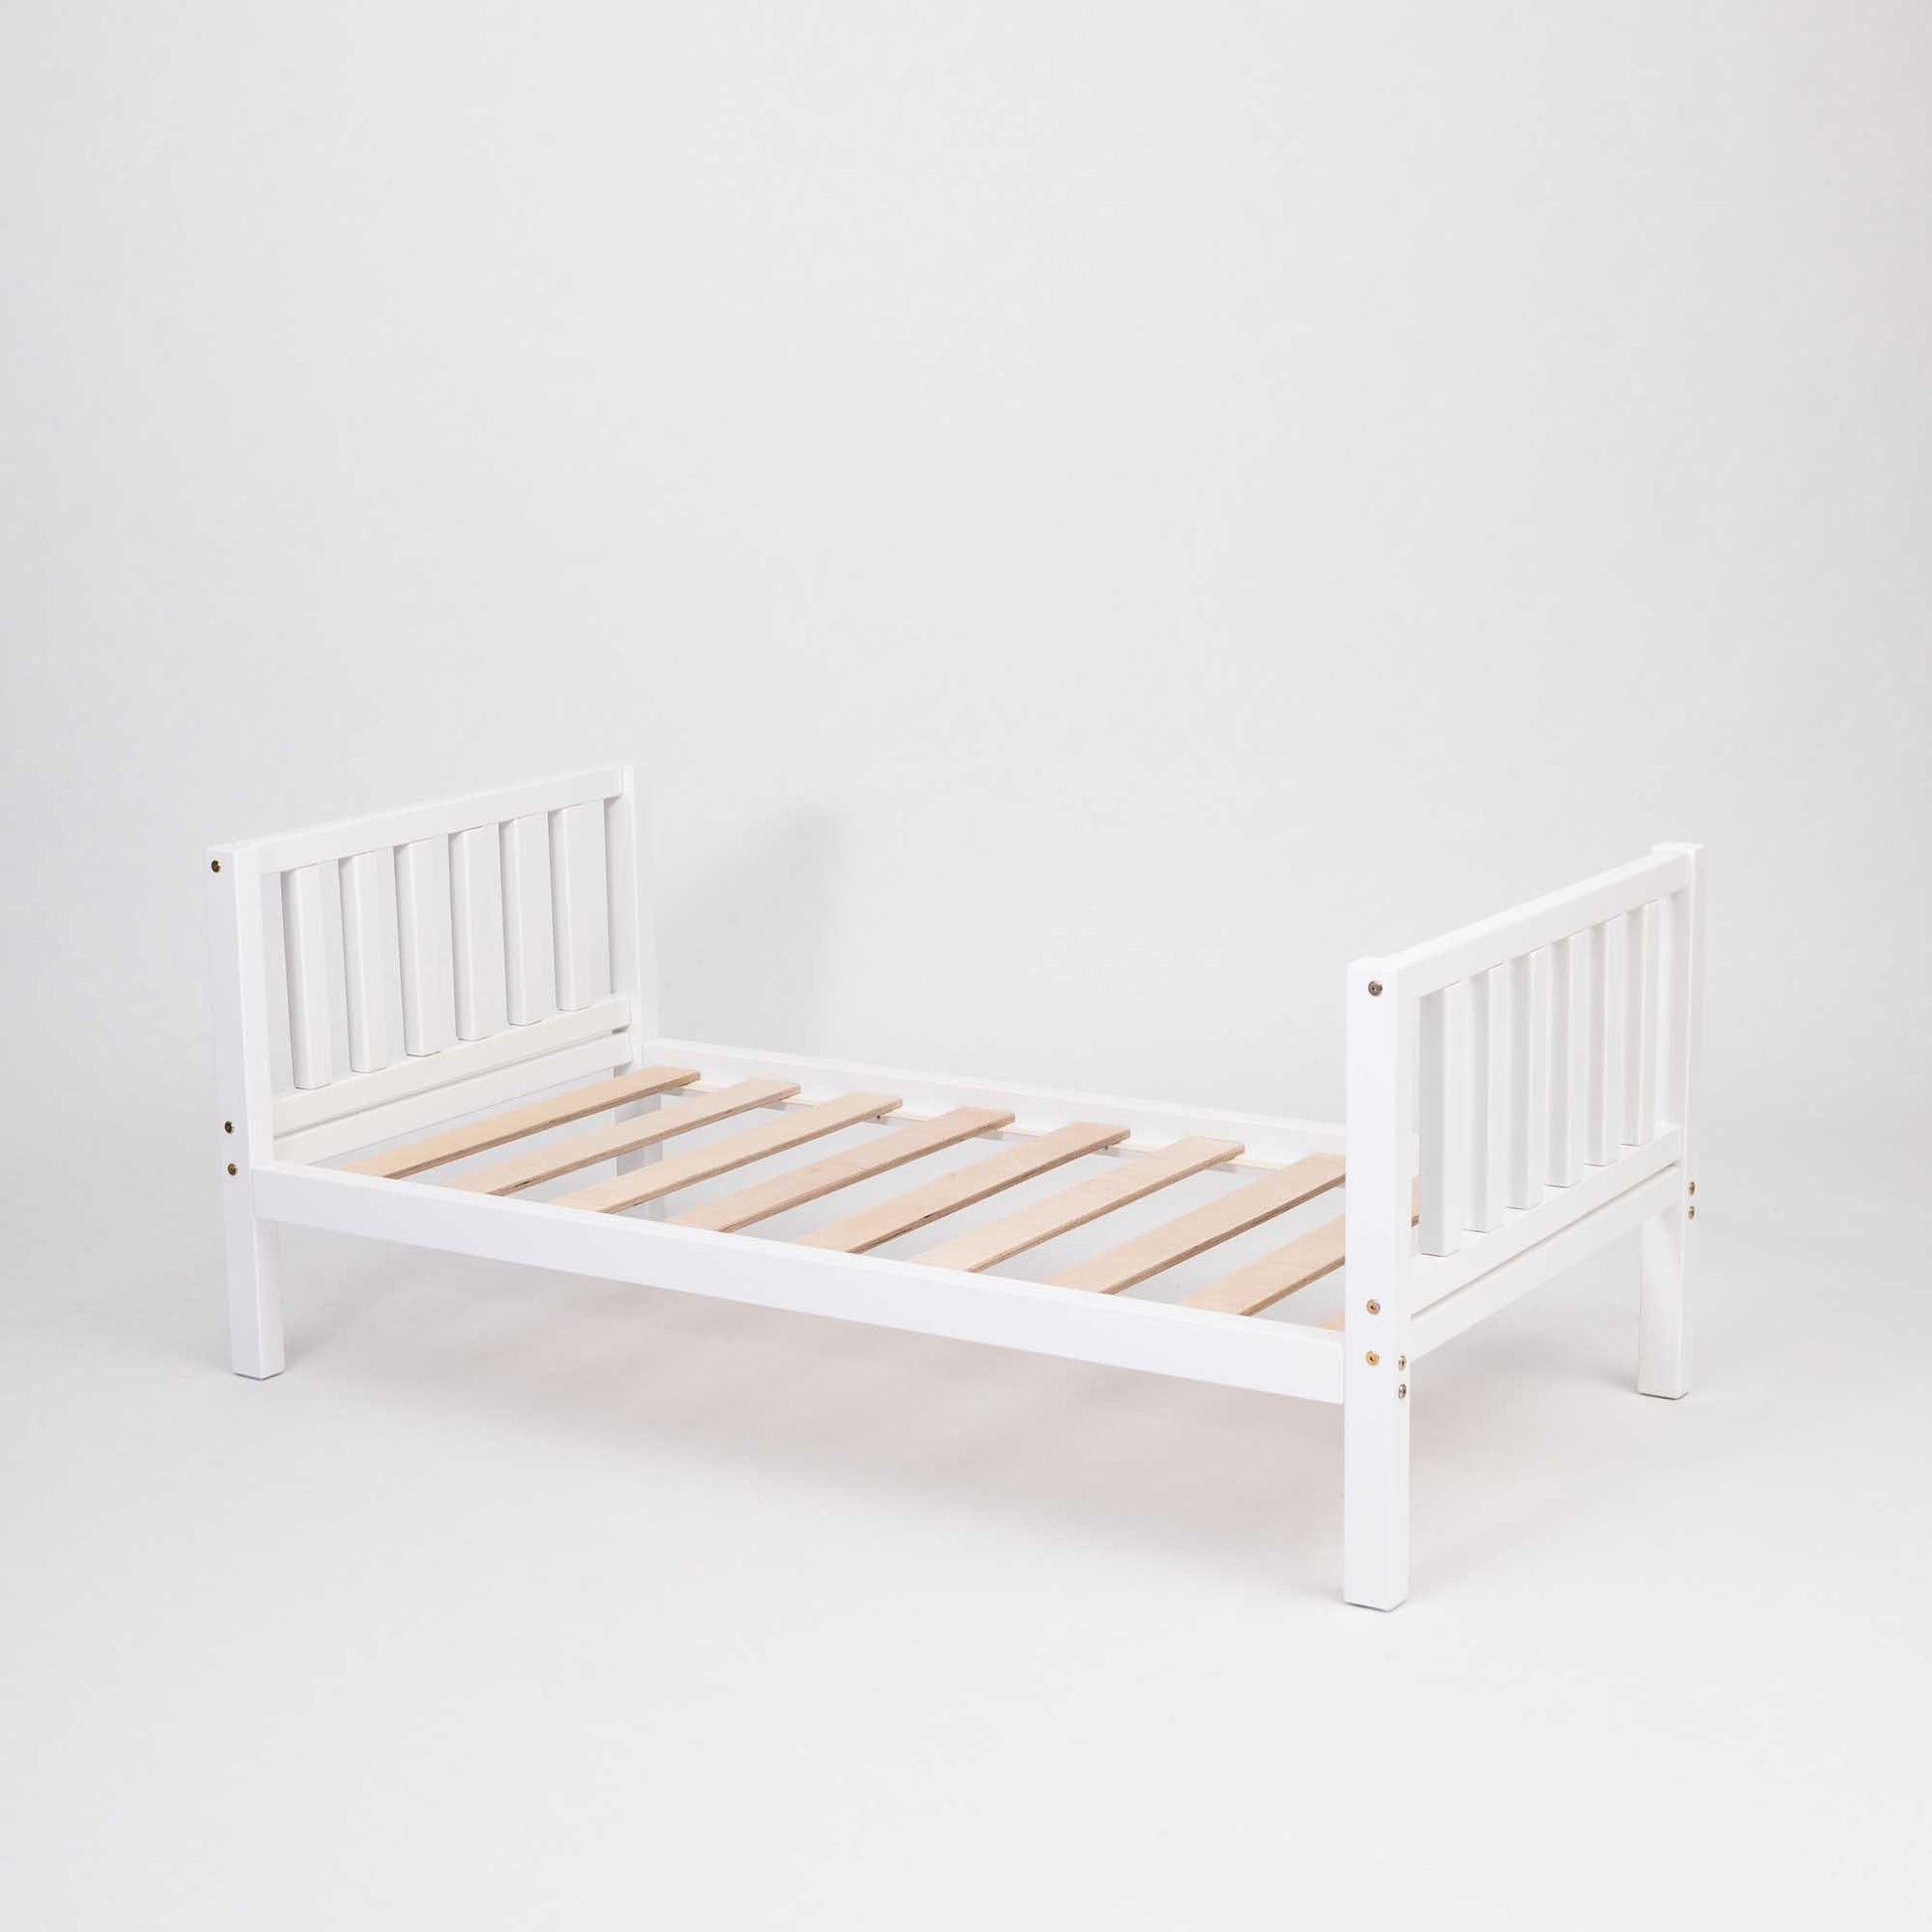 A Sweet Home From Wood Montessori-inspired raised kids' bed on legs with a headboard and footboard, with wooden slats on a white background.